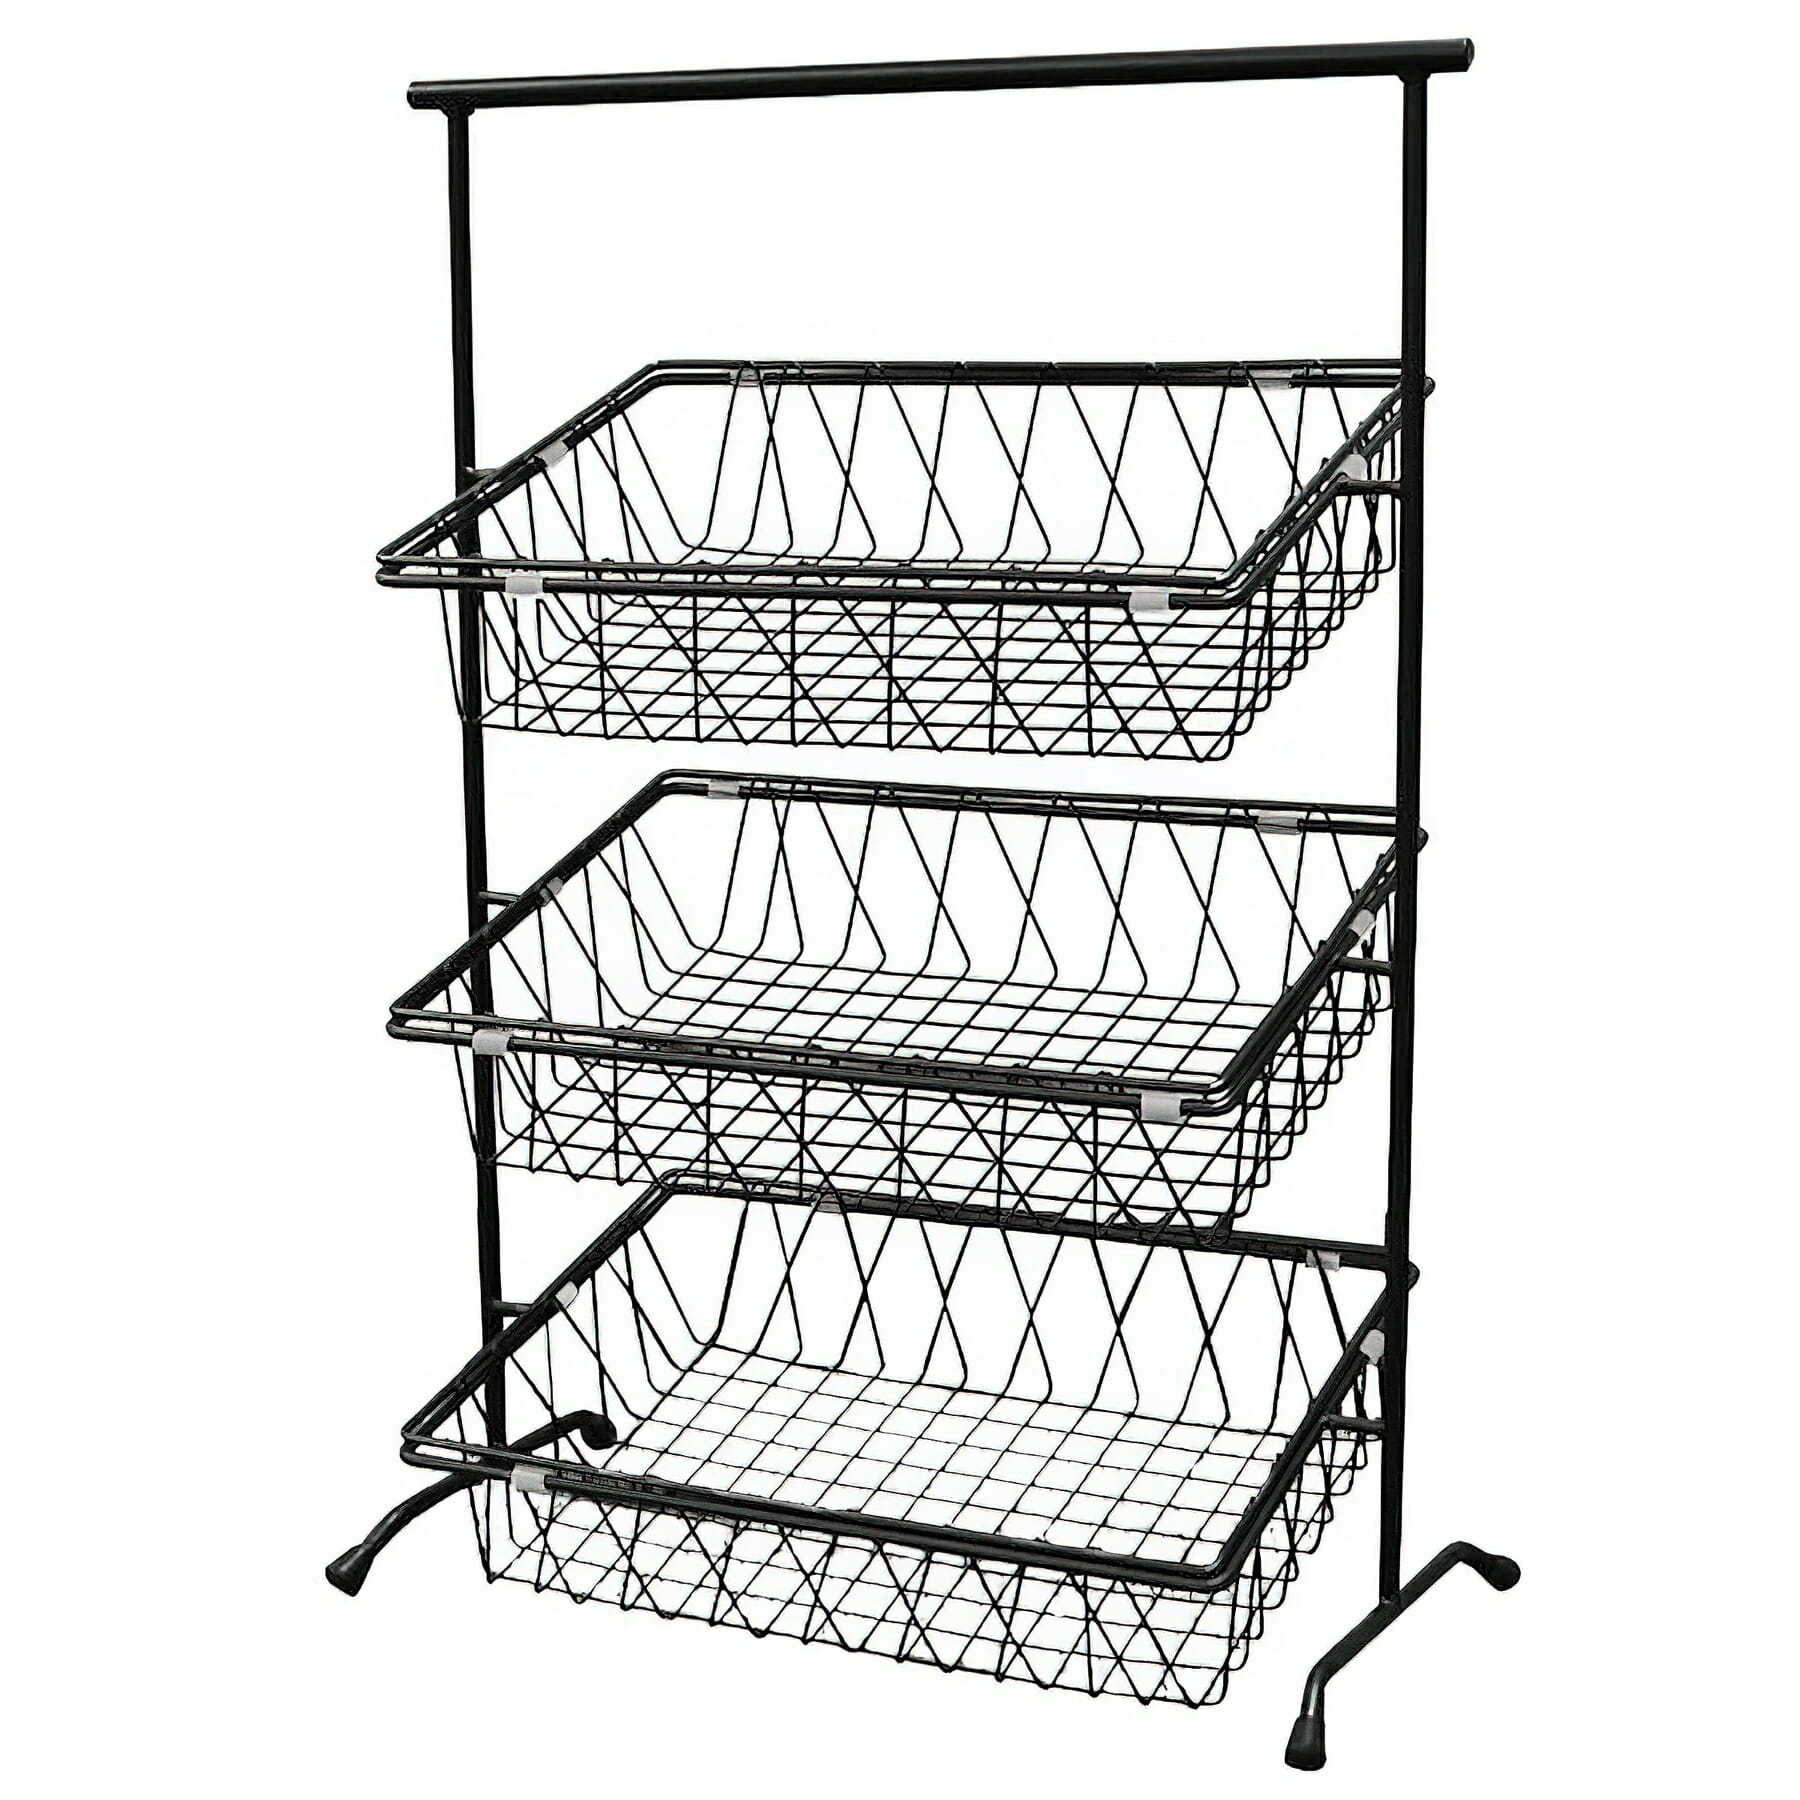 22.75"x 11" Rectangular 3-Tier Tilted Pane Stand, 31.25" tall (fits IR-903, IR-904, BAMTRY-01, BAMTRY-02, WB-953, WB-954)